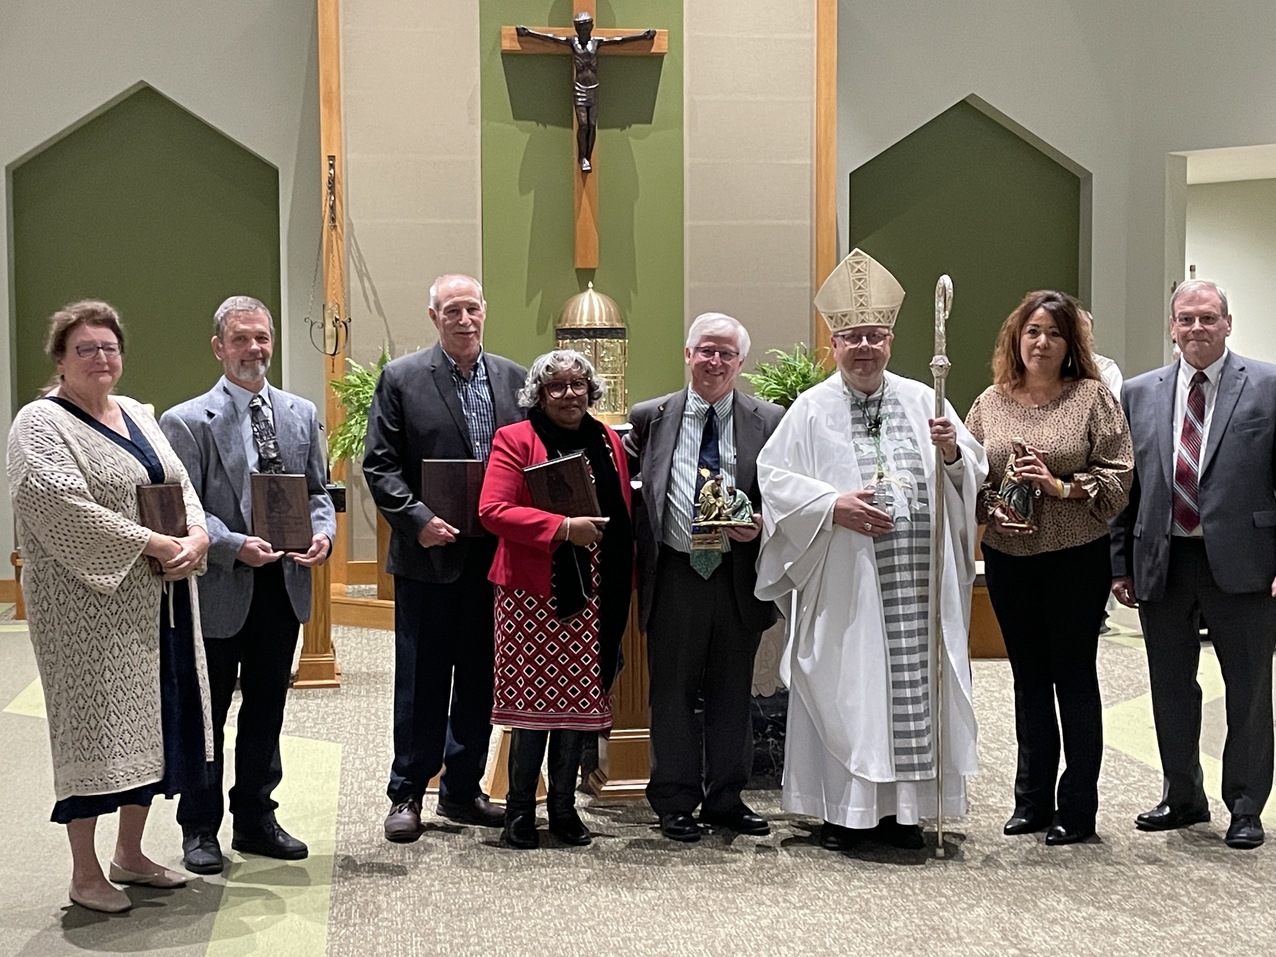 Catholic Charities employees recognized for dedication, contributions